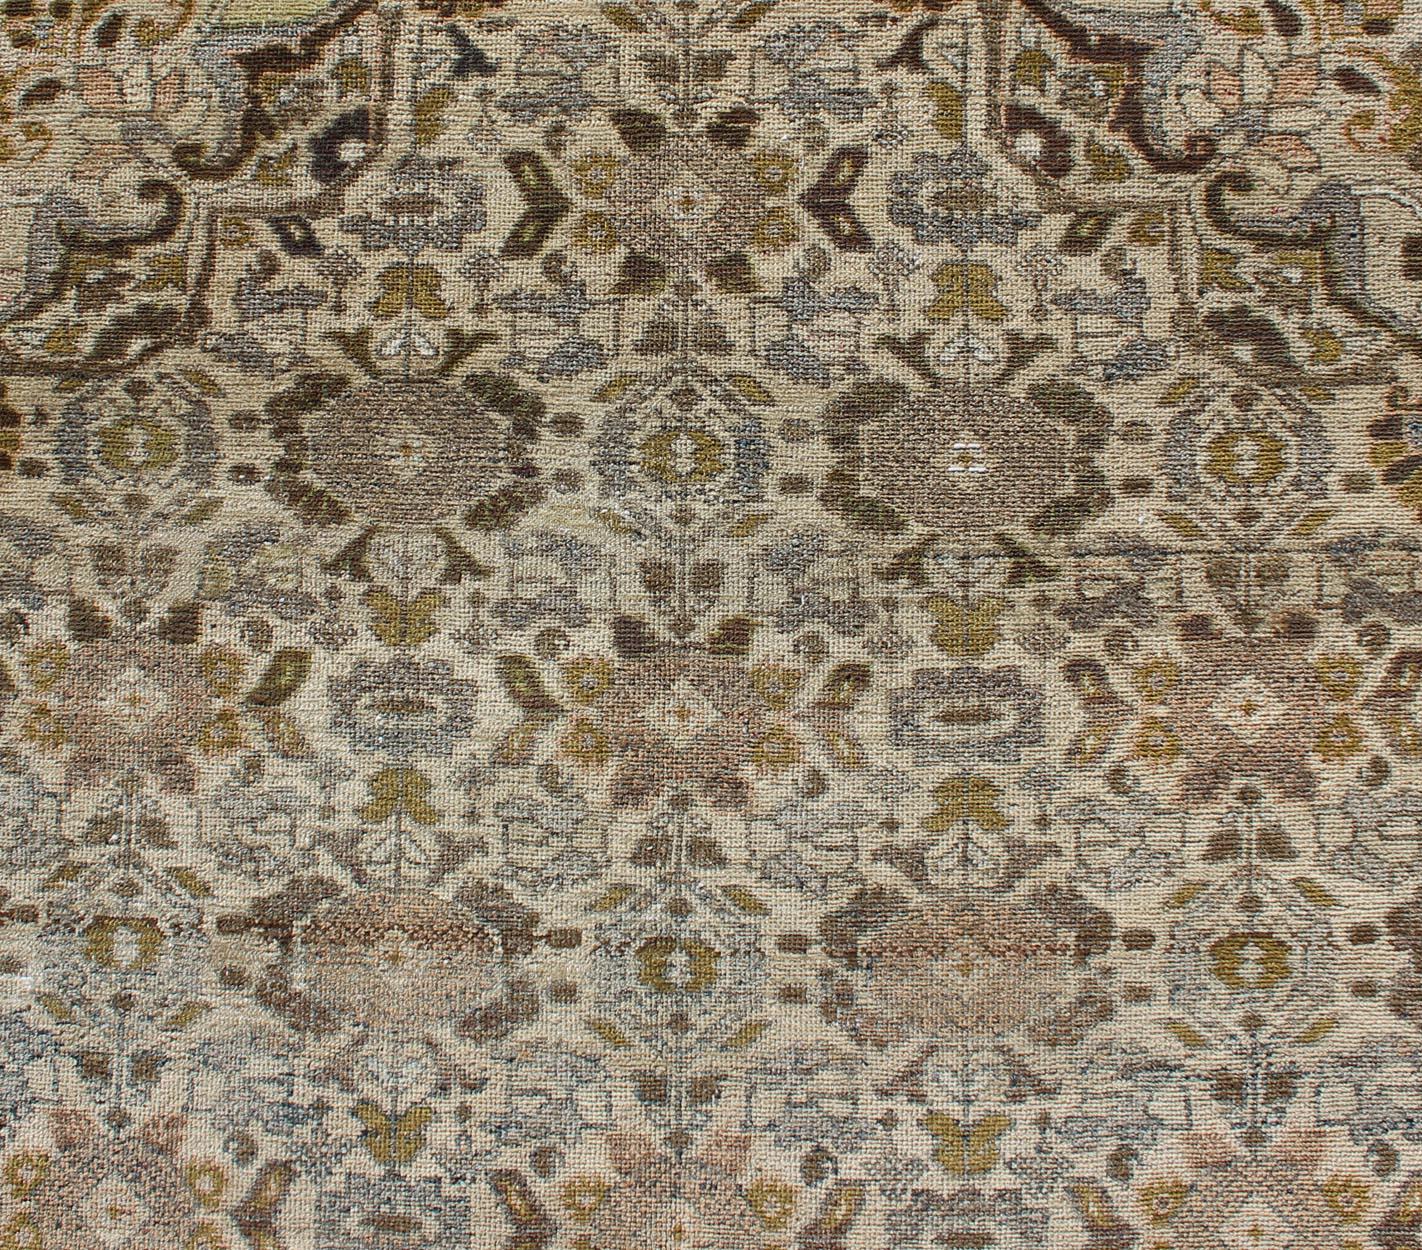 Early 20th Century Antique Persian Malayer Rug with All-Over Boteh Design in Earth Tones